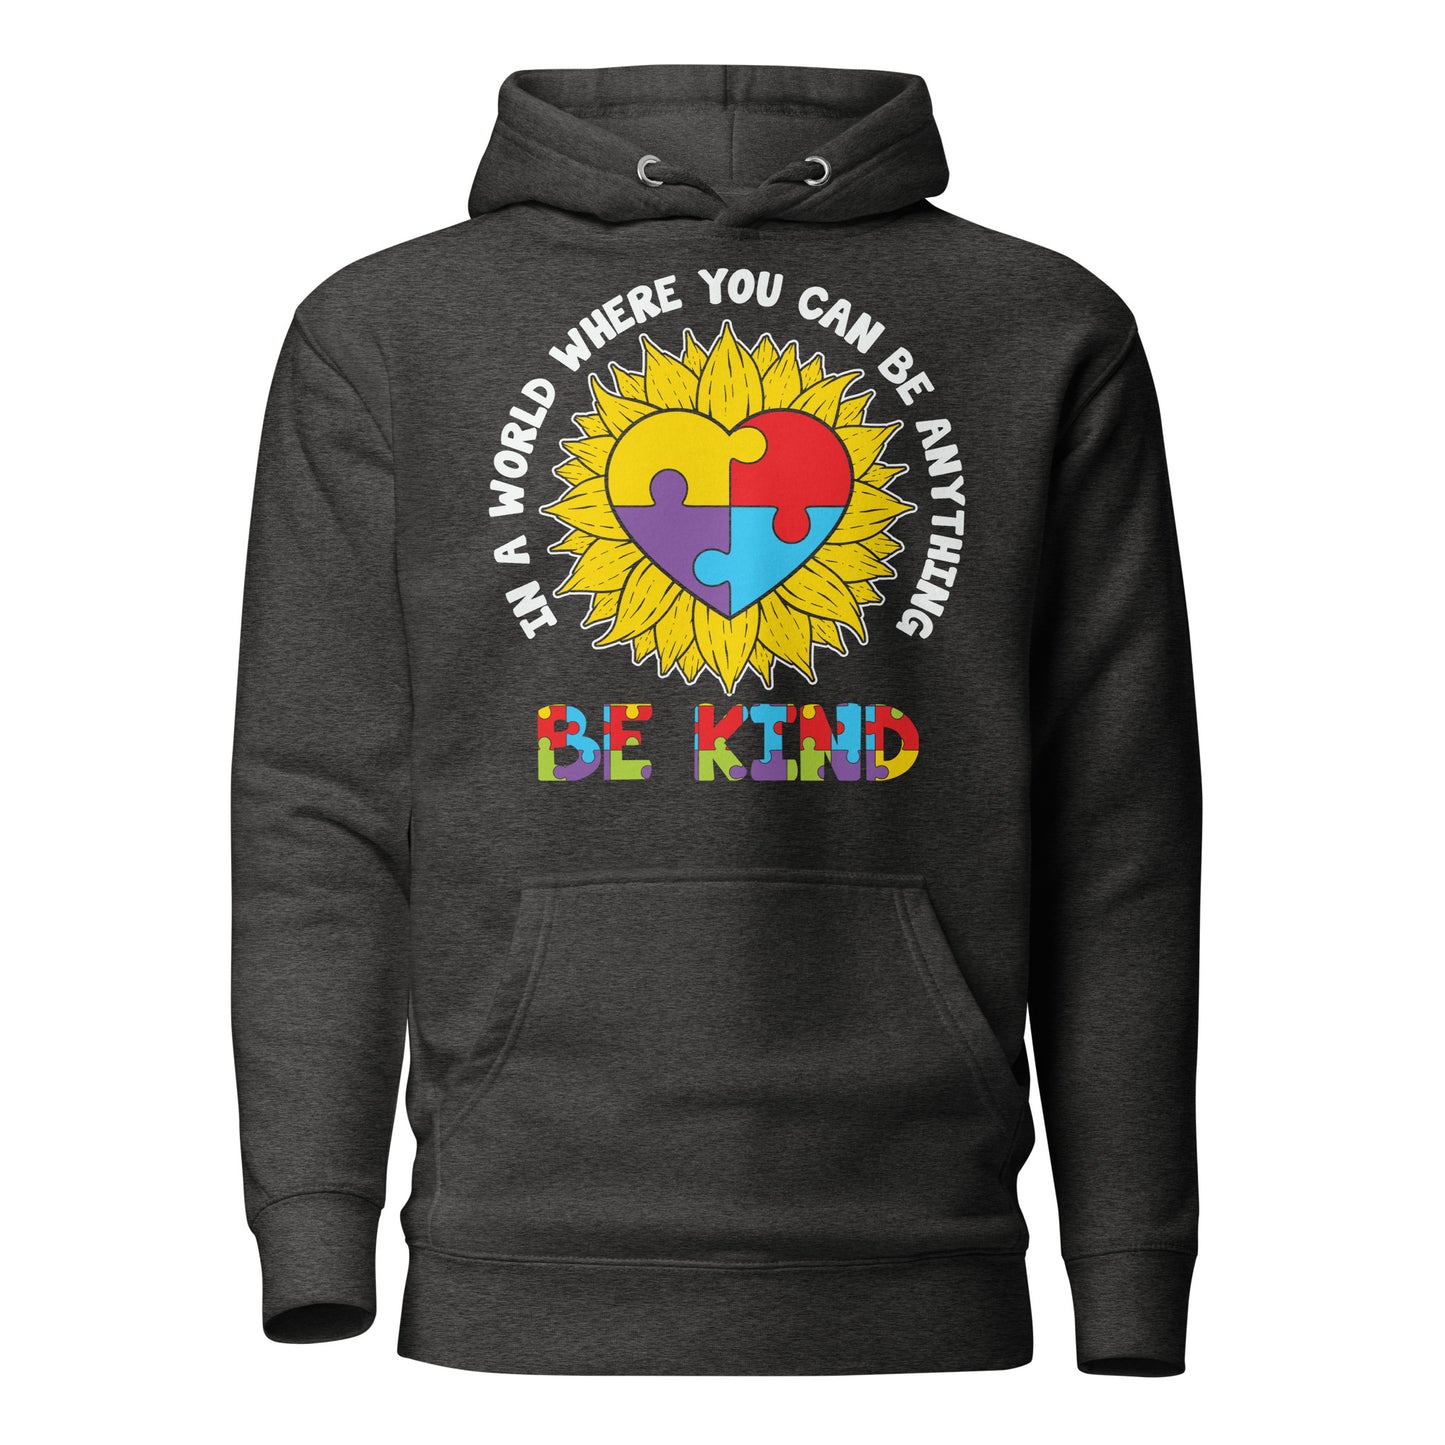 Be Kind Autism Acceptance Quality Cotton Heritage Adult Hoodie